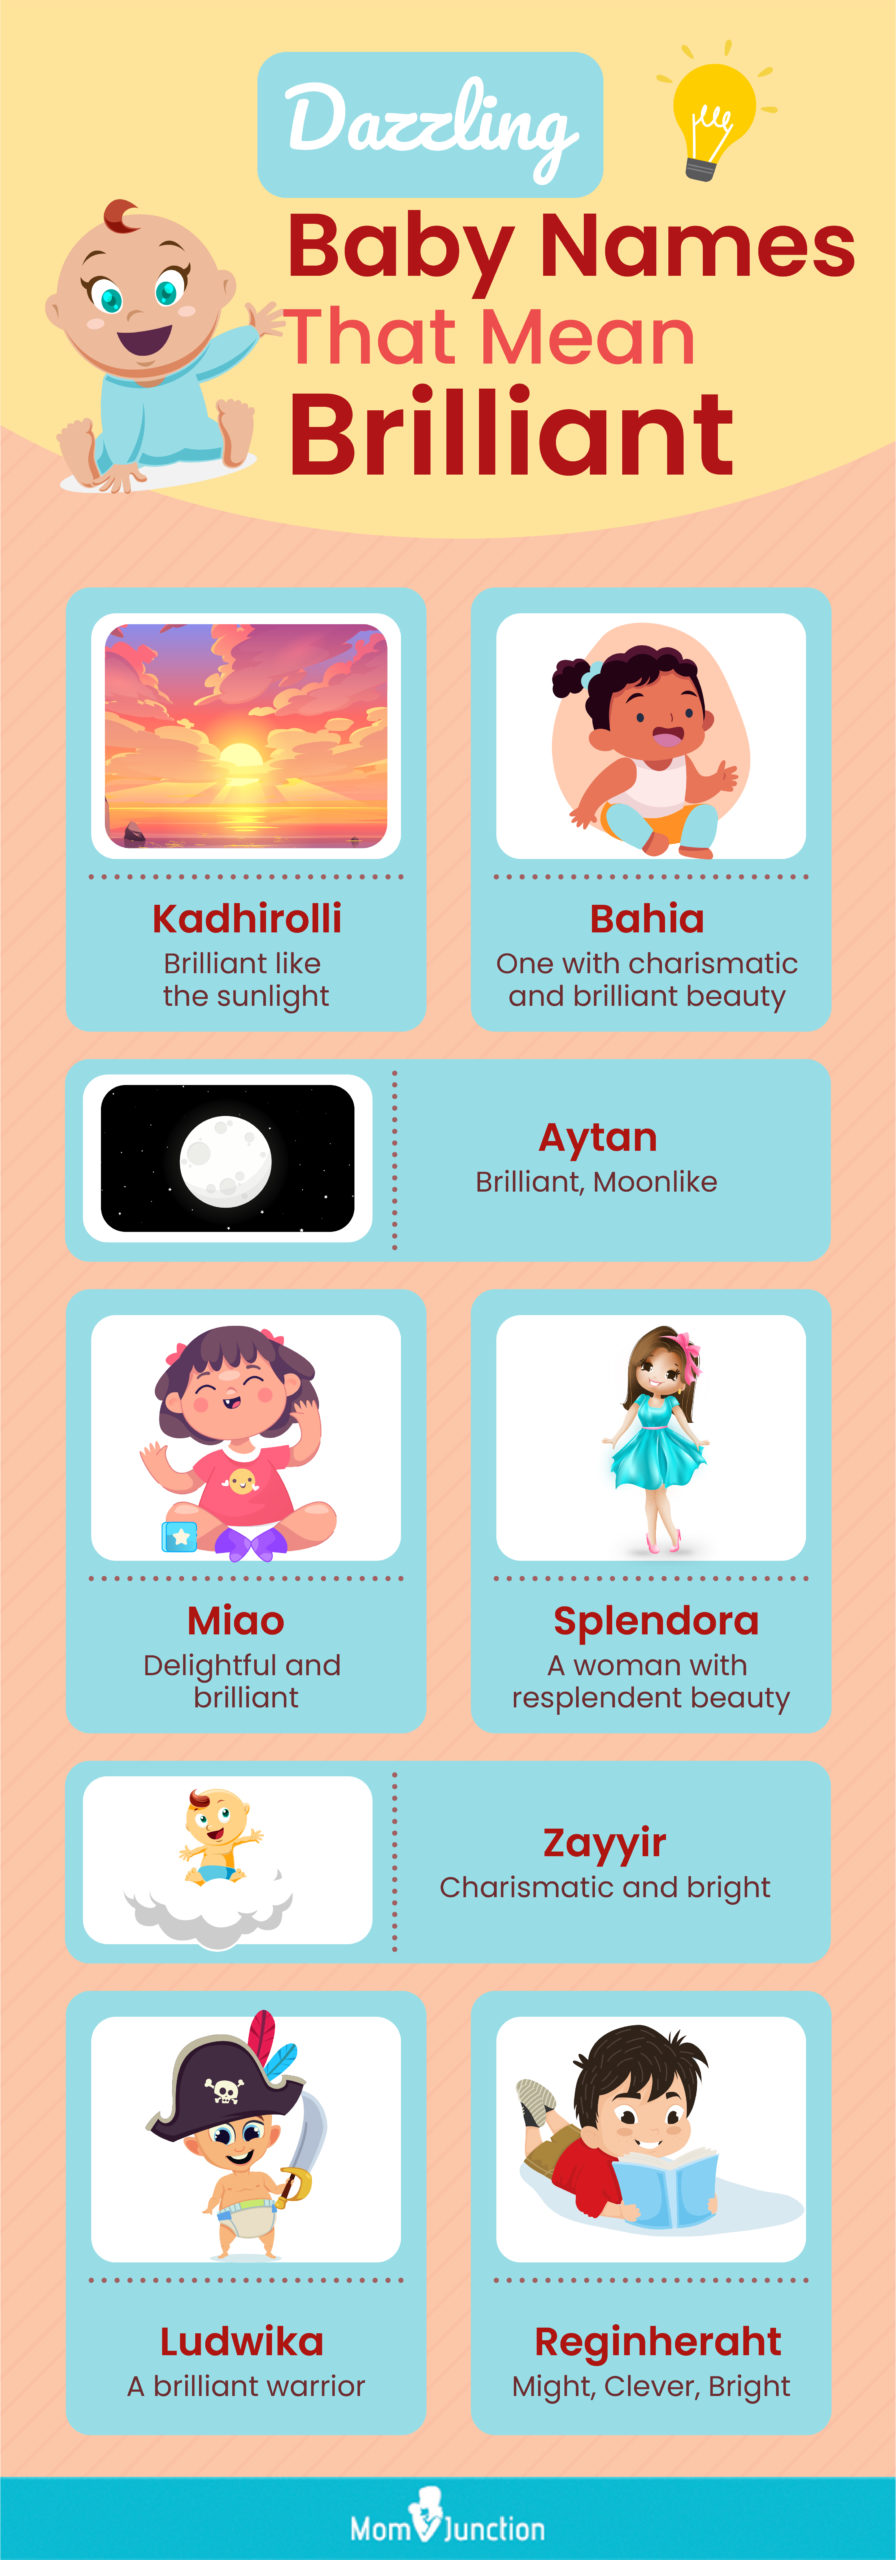 dazzling baby names that mean brilliant (infographic)